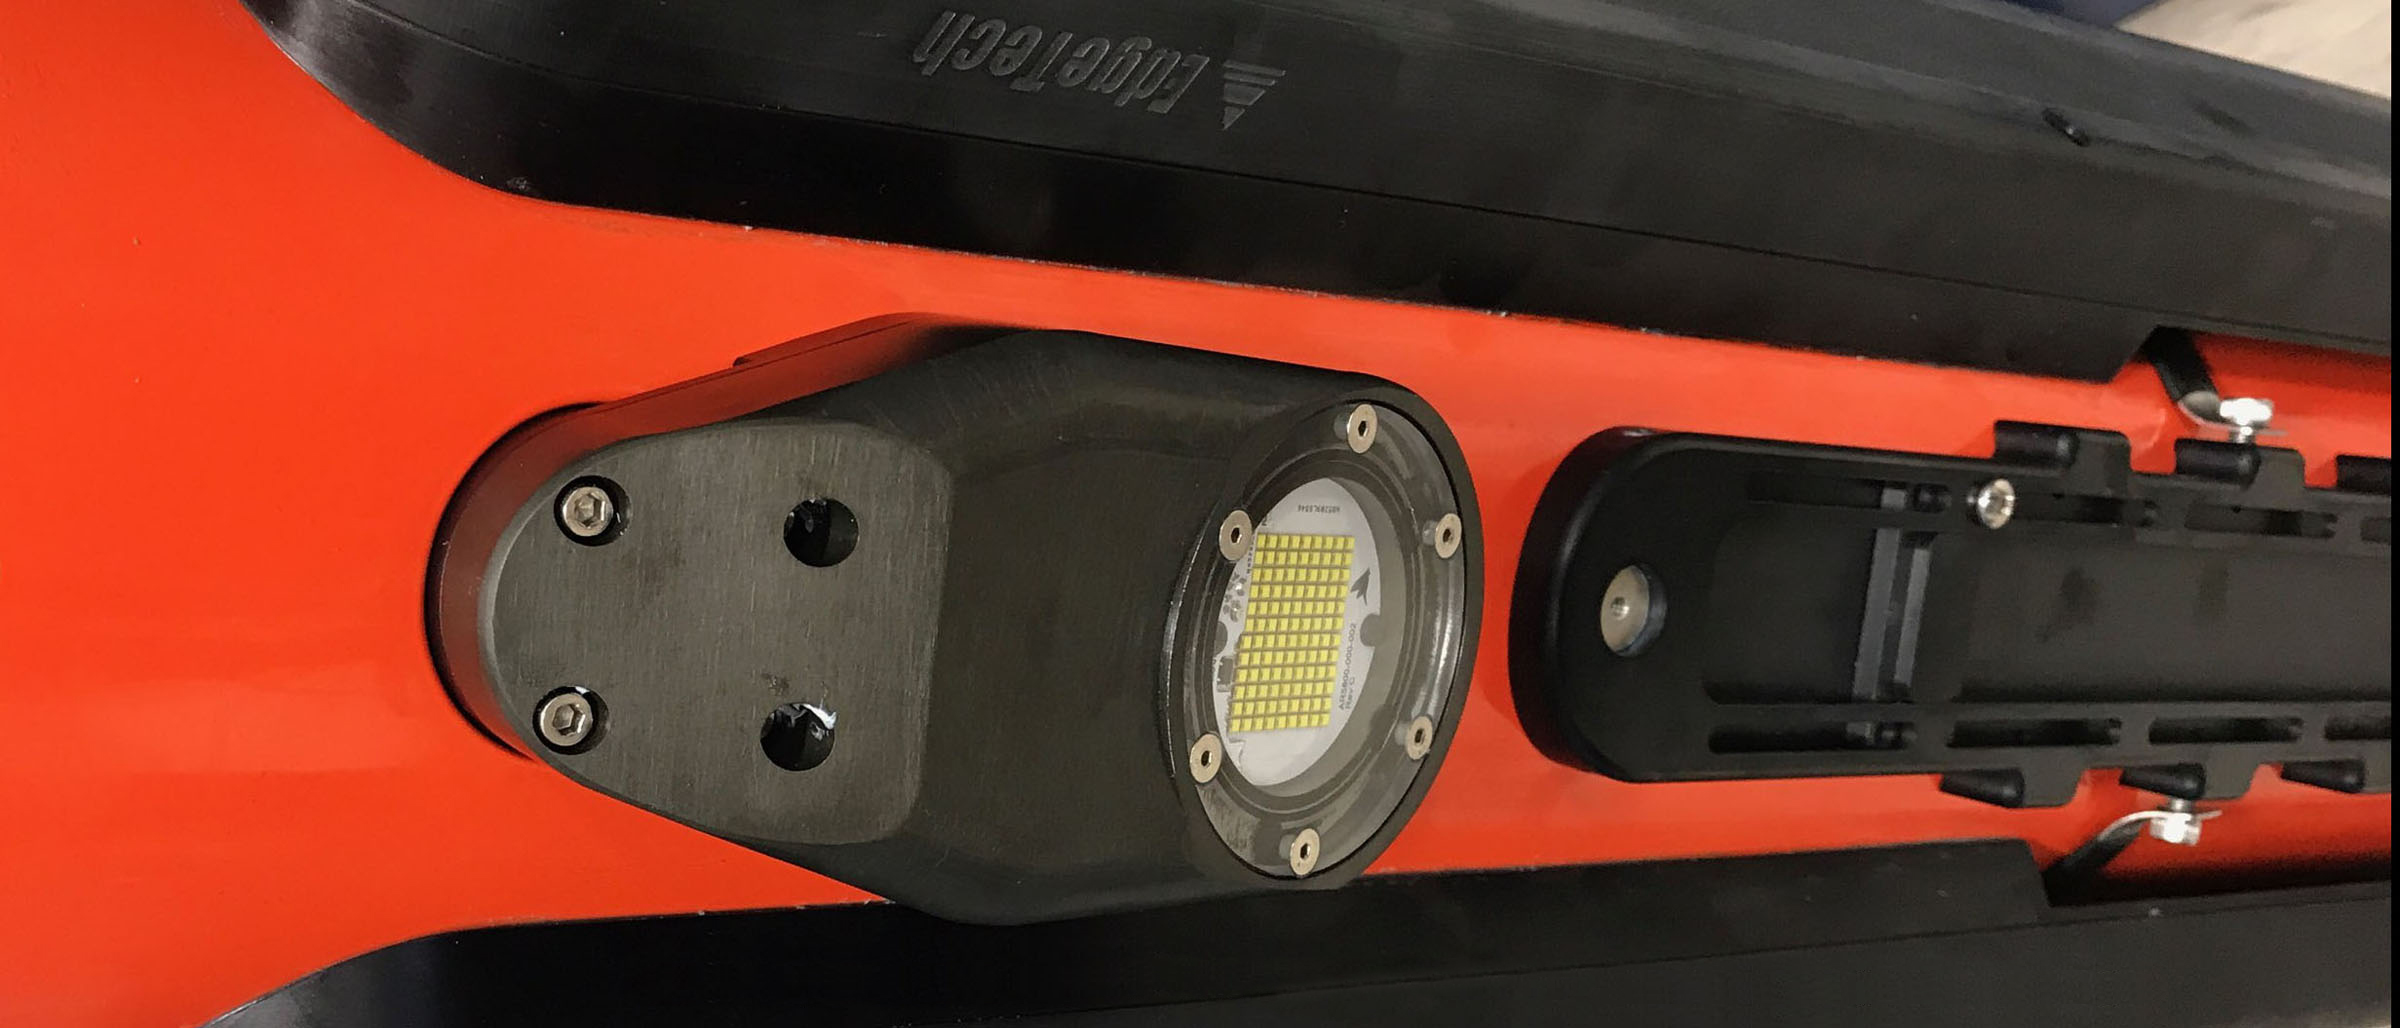 Remora high-intensity strobe light fitted onto the L3Technologies Iver UUV